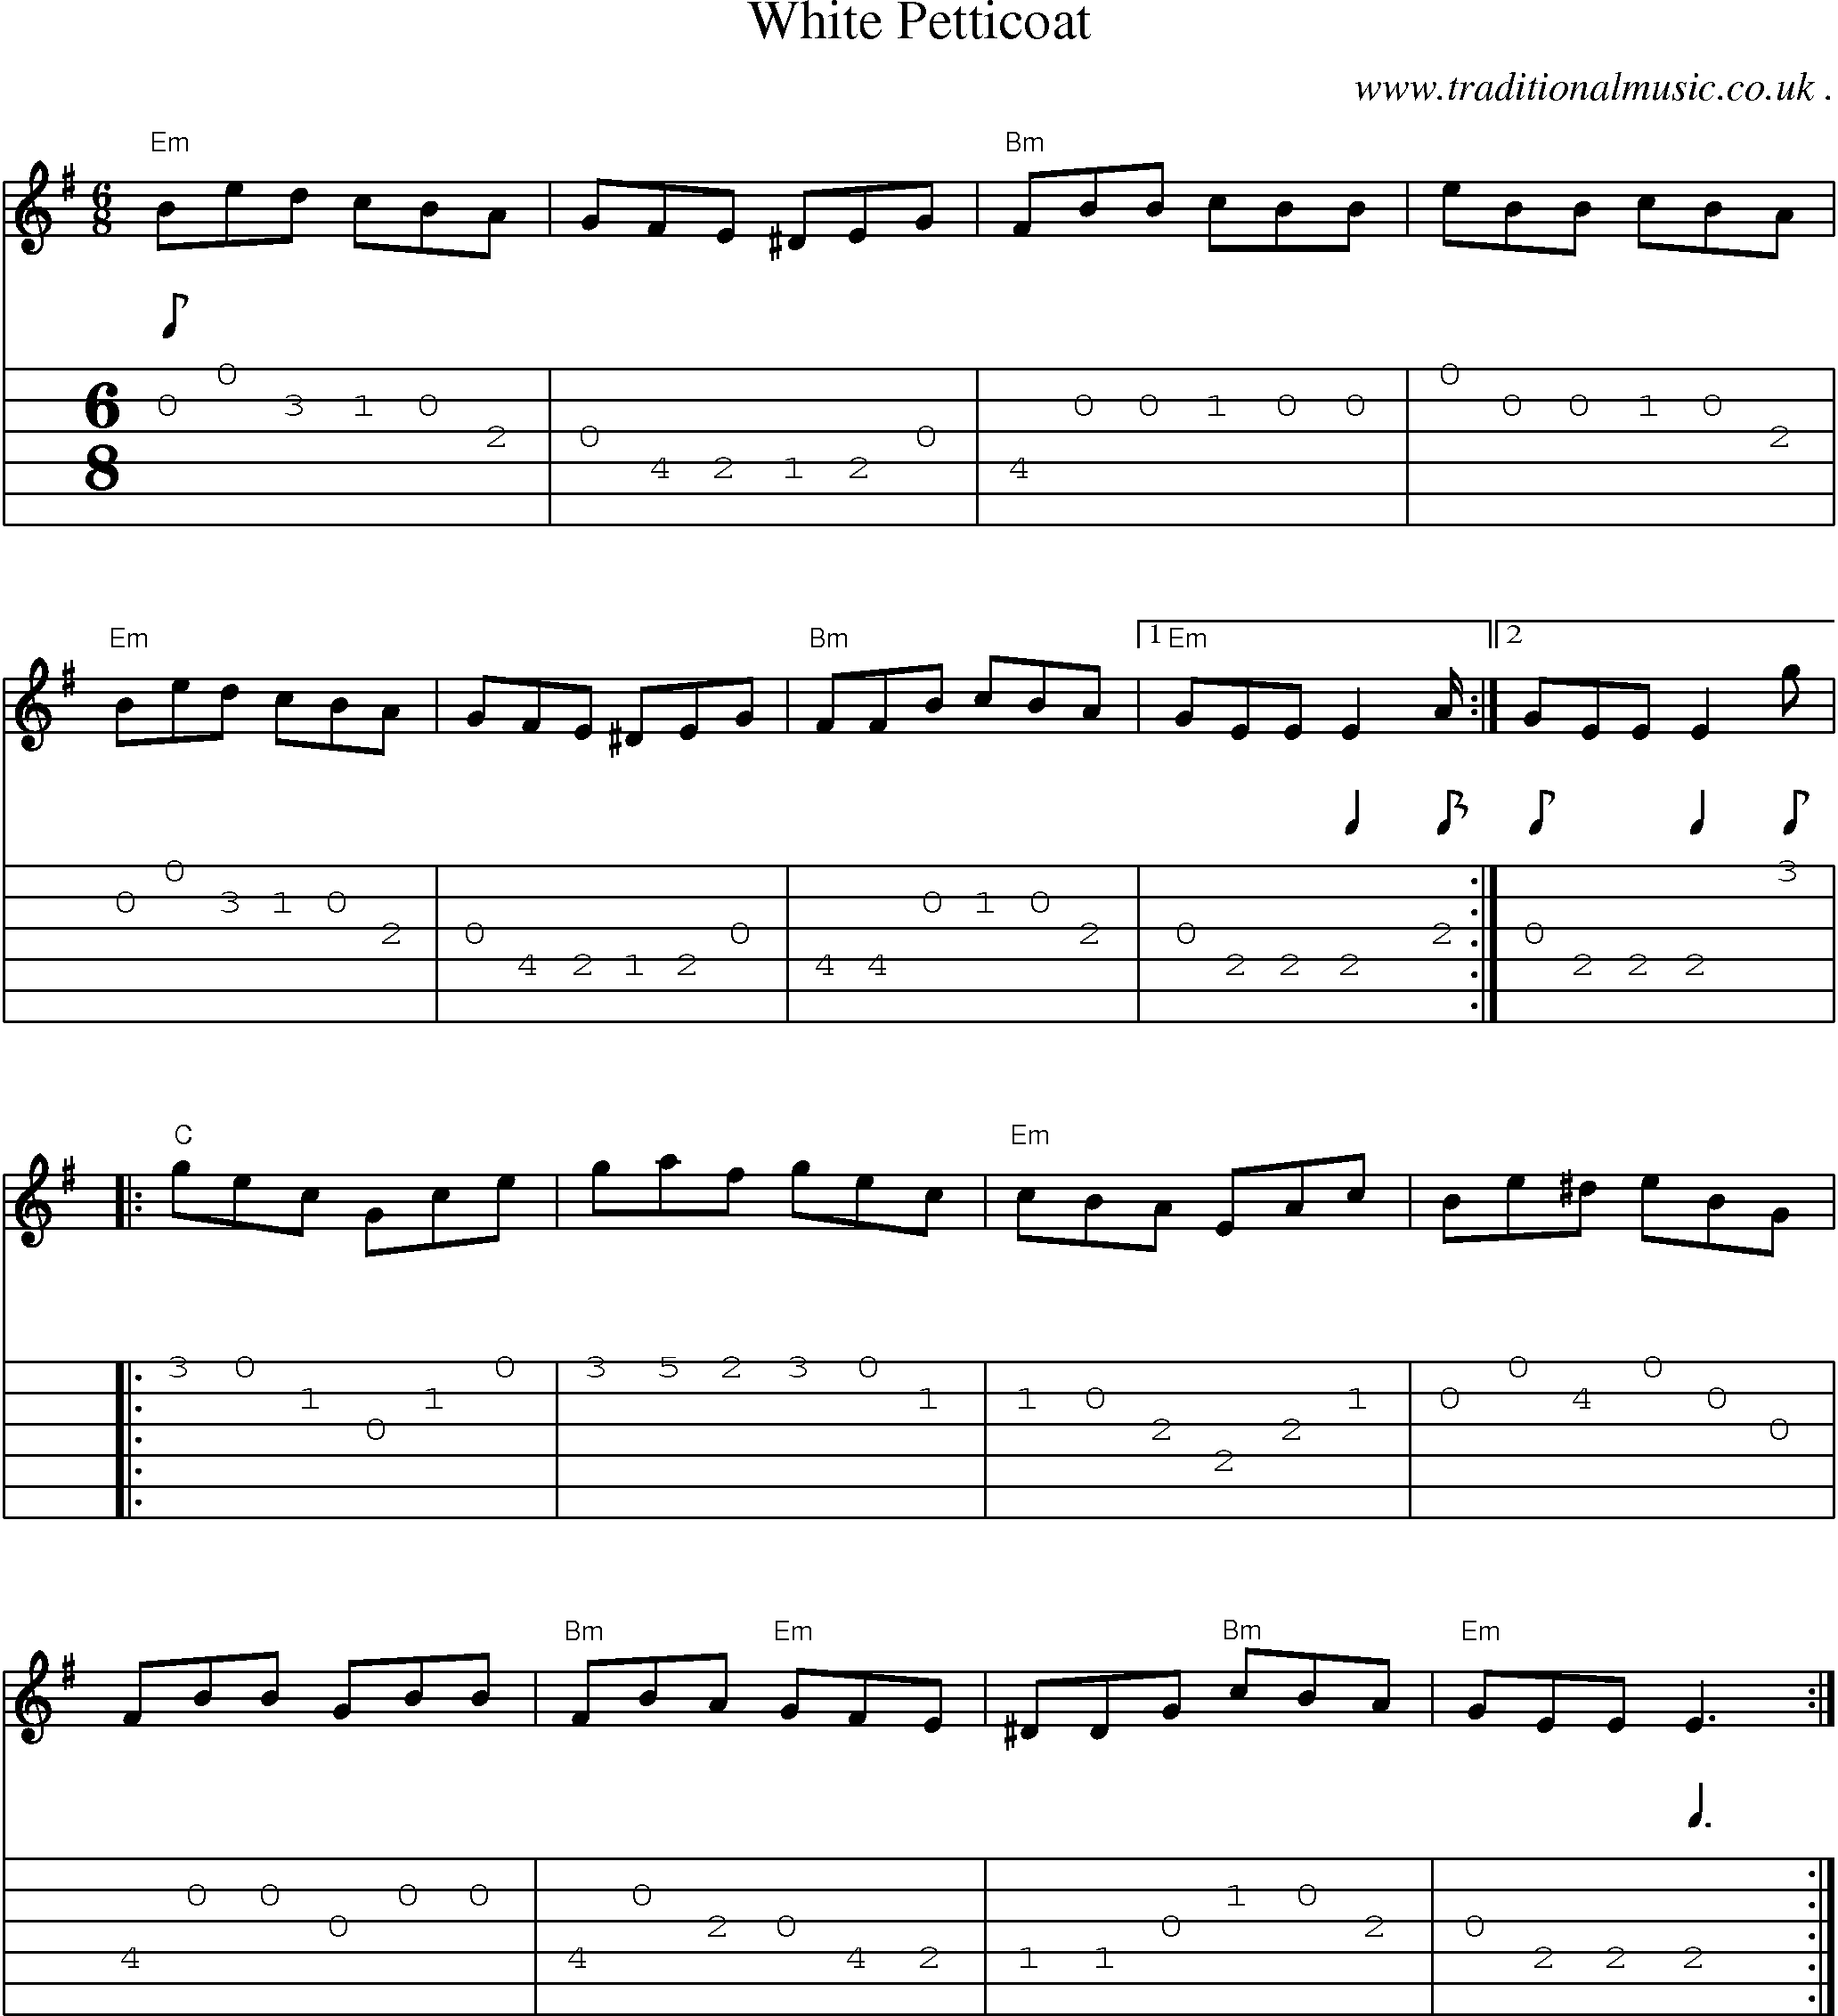 Music Score and Guitar Tabs for White Petticoat